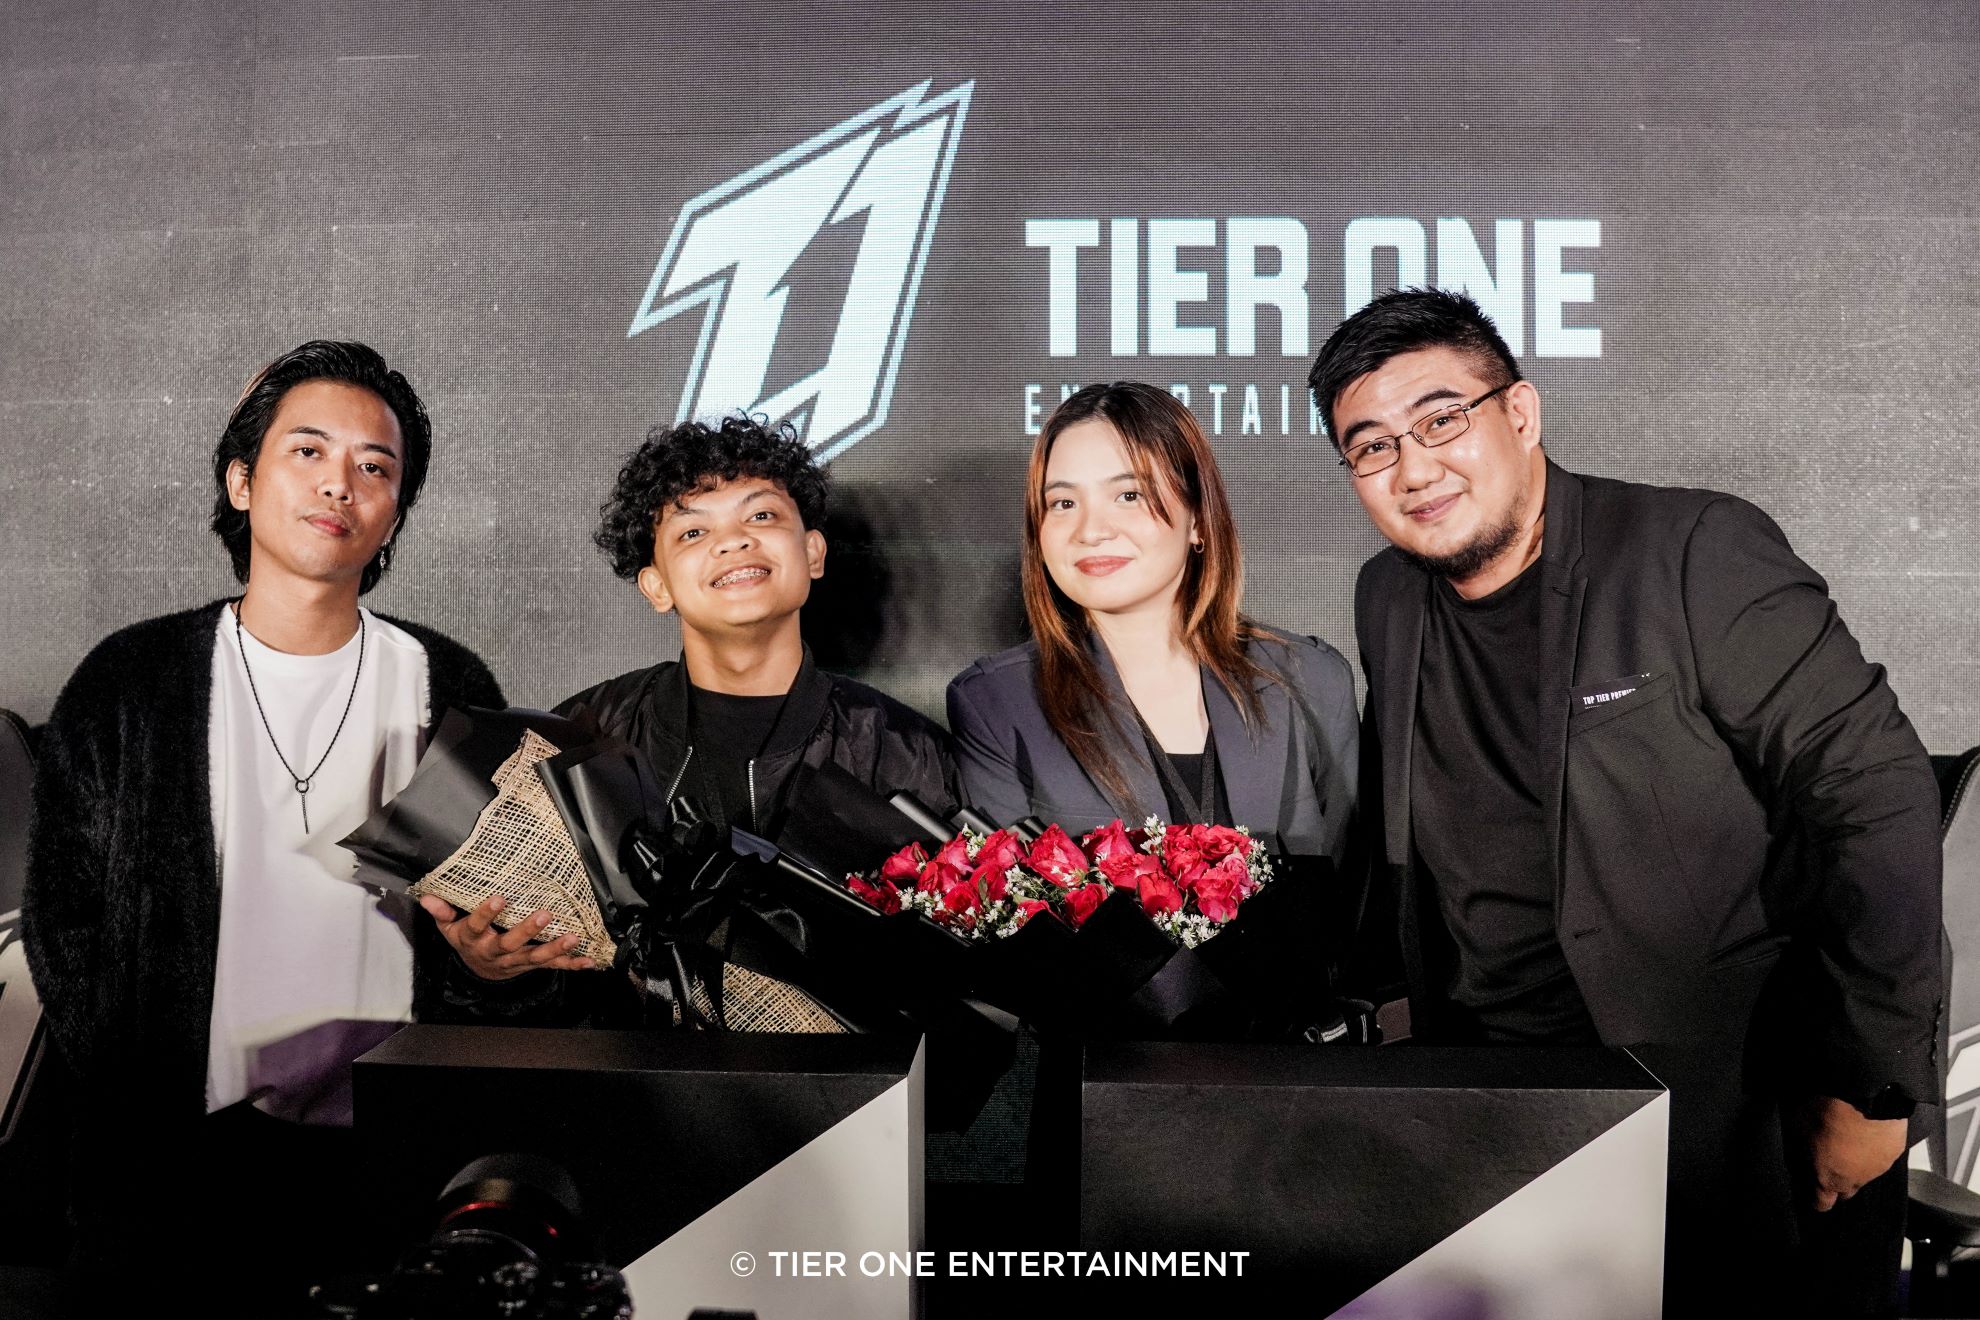 Tier One Entertainment CEO and Co-Founder Tryke Gutierrez, talents Bulldog and Sharlene San Pedro, and Tier One Entertainment Vice President of Talent Operations and International Expansion Jaba Orellana.